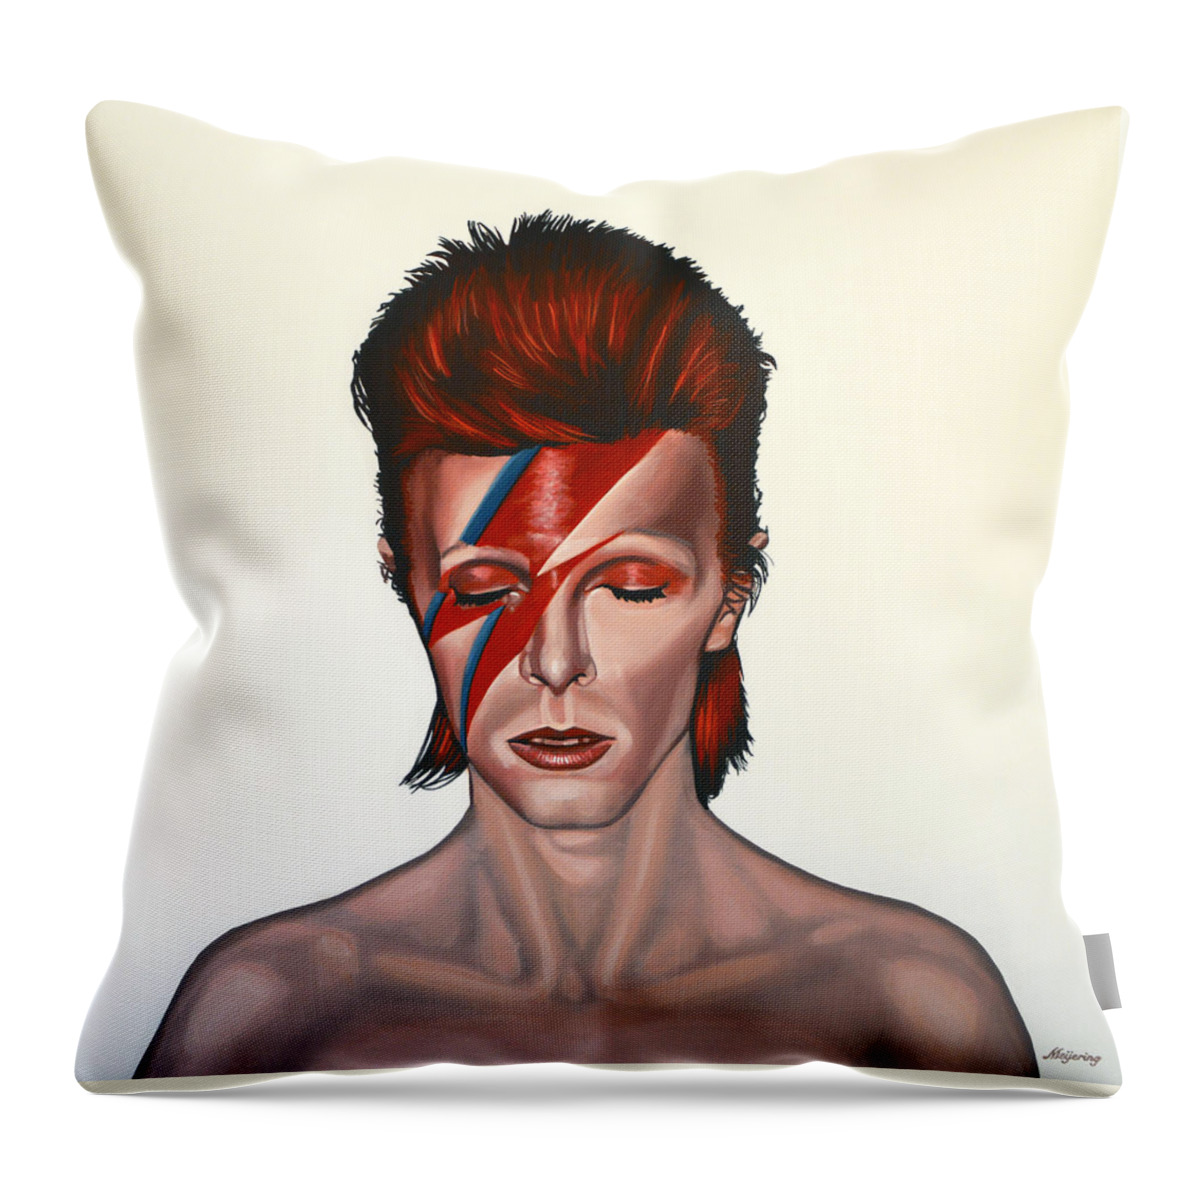 David Bowie Throw Pillow featuring the painting David Bowie Aladdin Sane by Paul Meijering